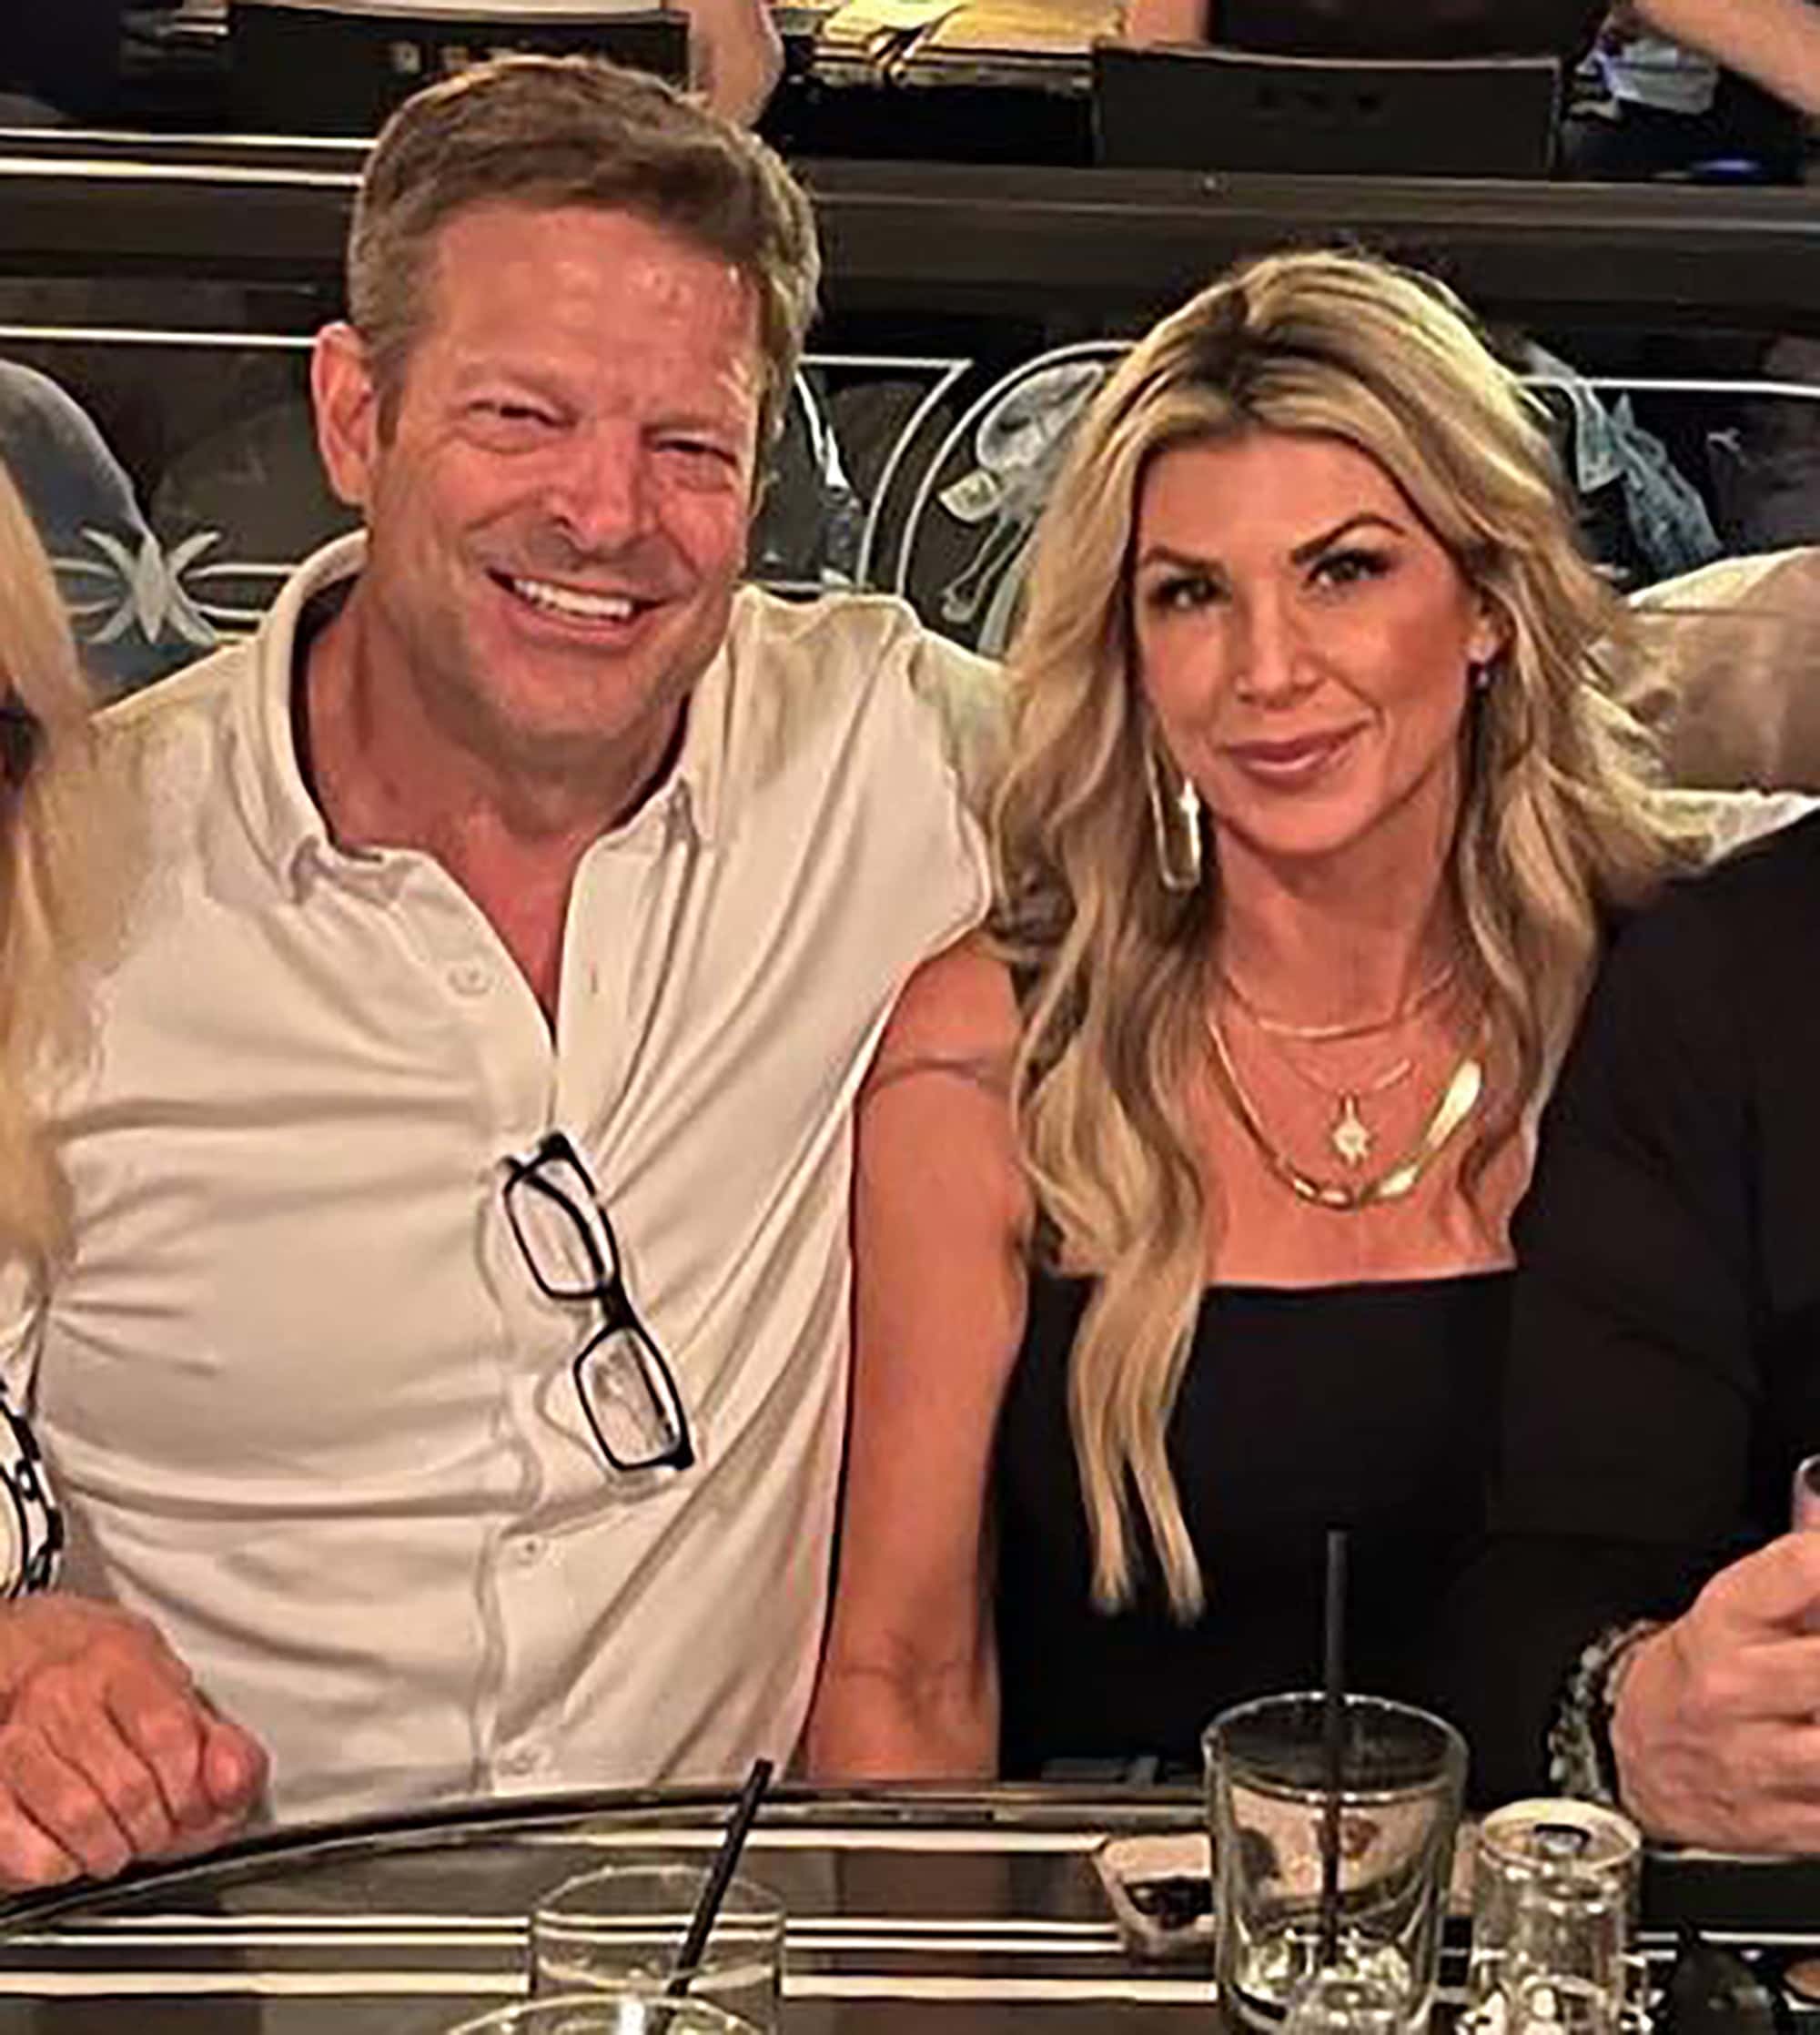 The Real Housewives of Orange County Season 18 Returns with New Drama and Familiar Faces